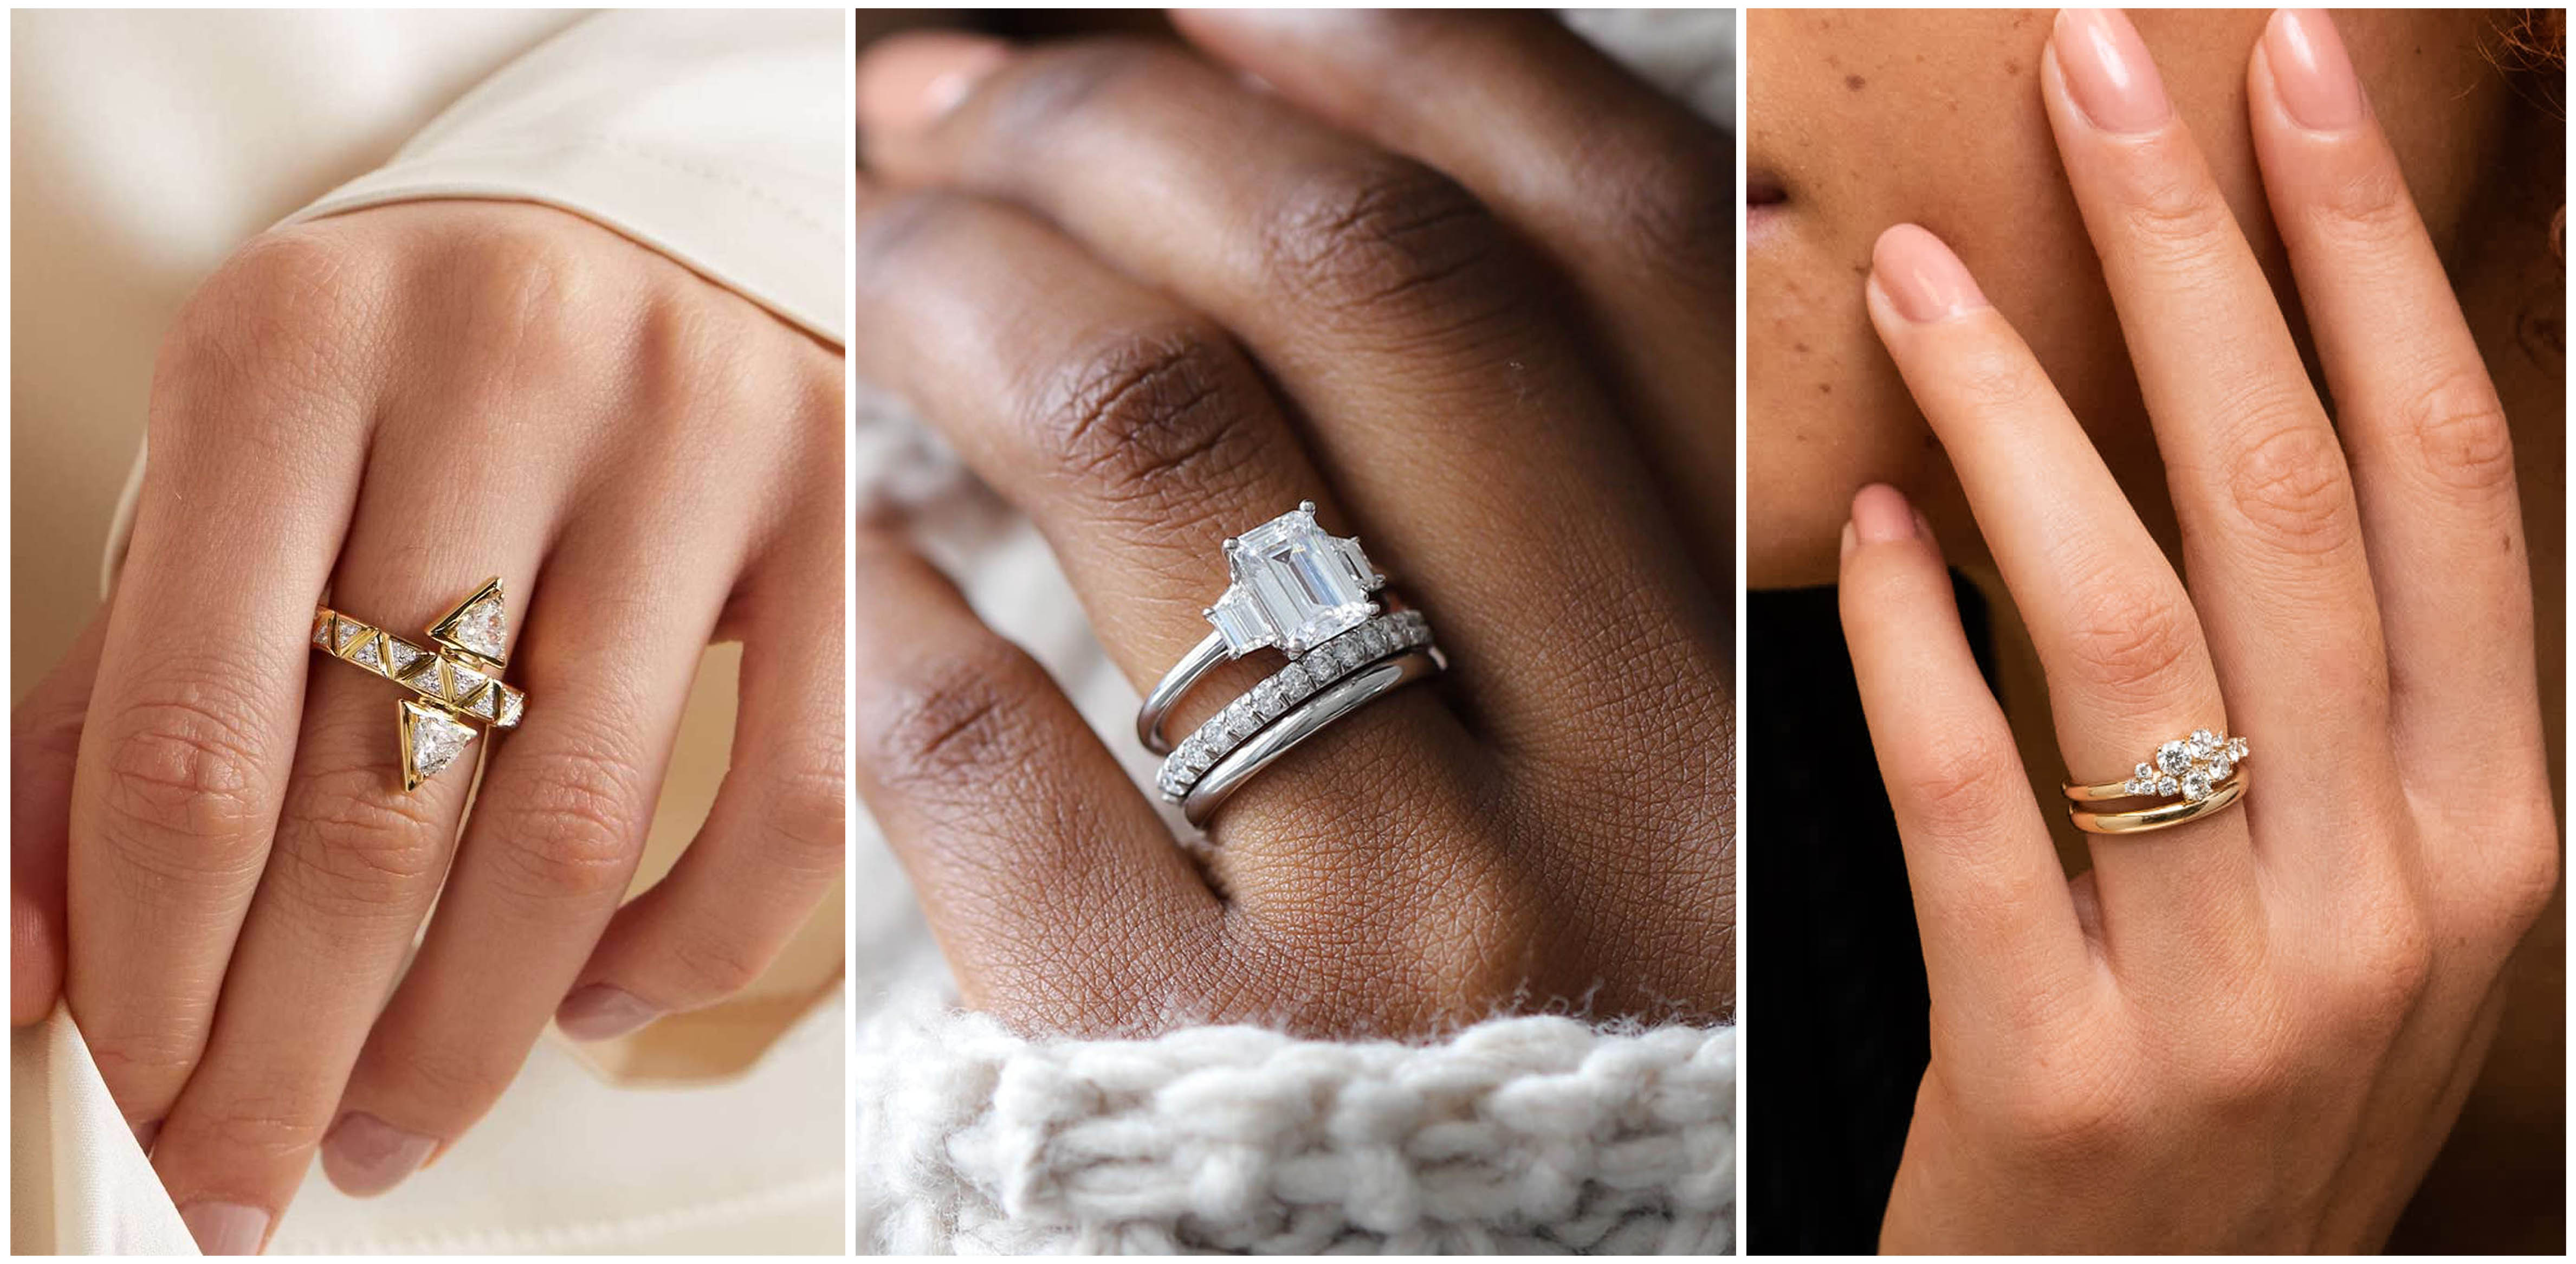 Do you wear your engagement ring on your wedding day? - Shining Diamonds